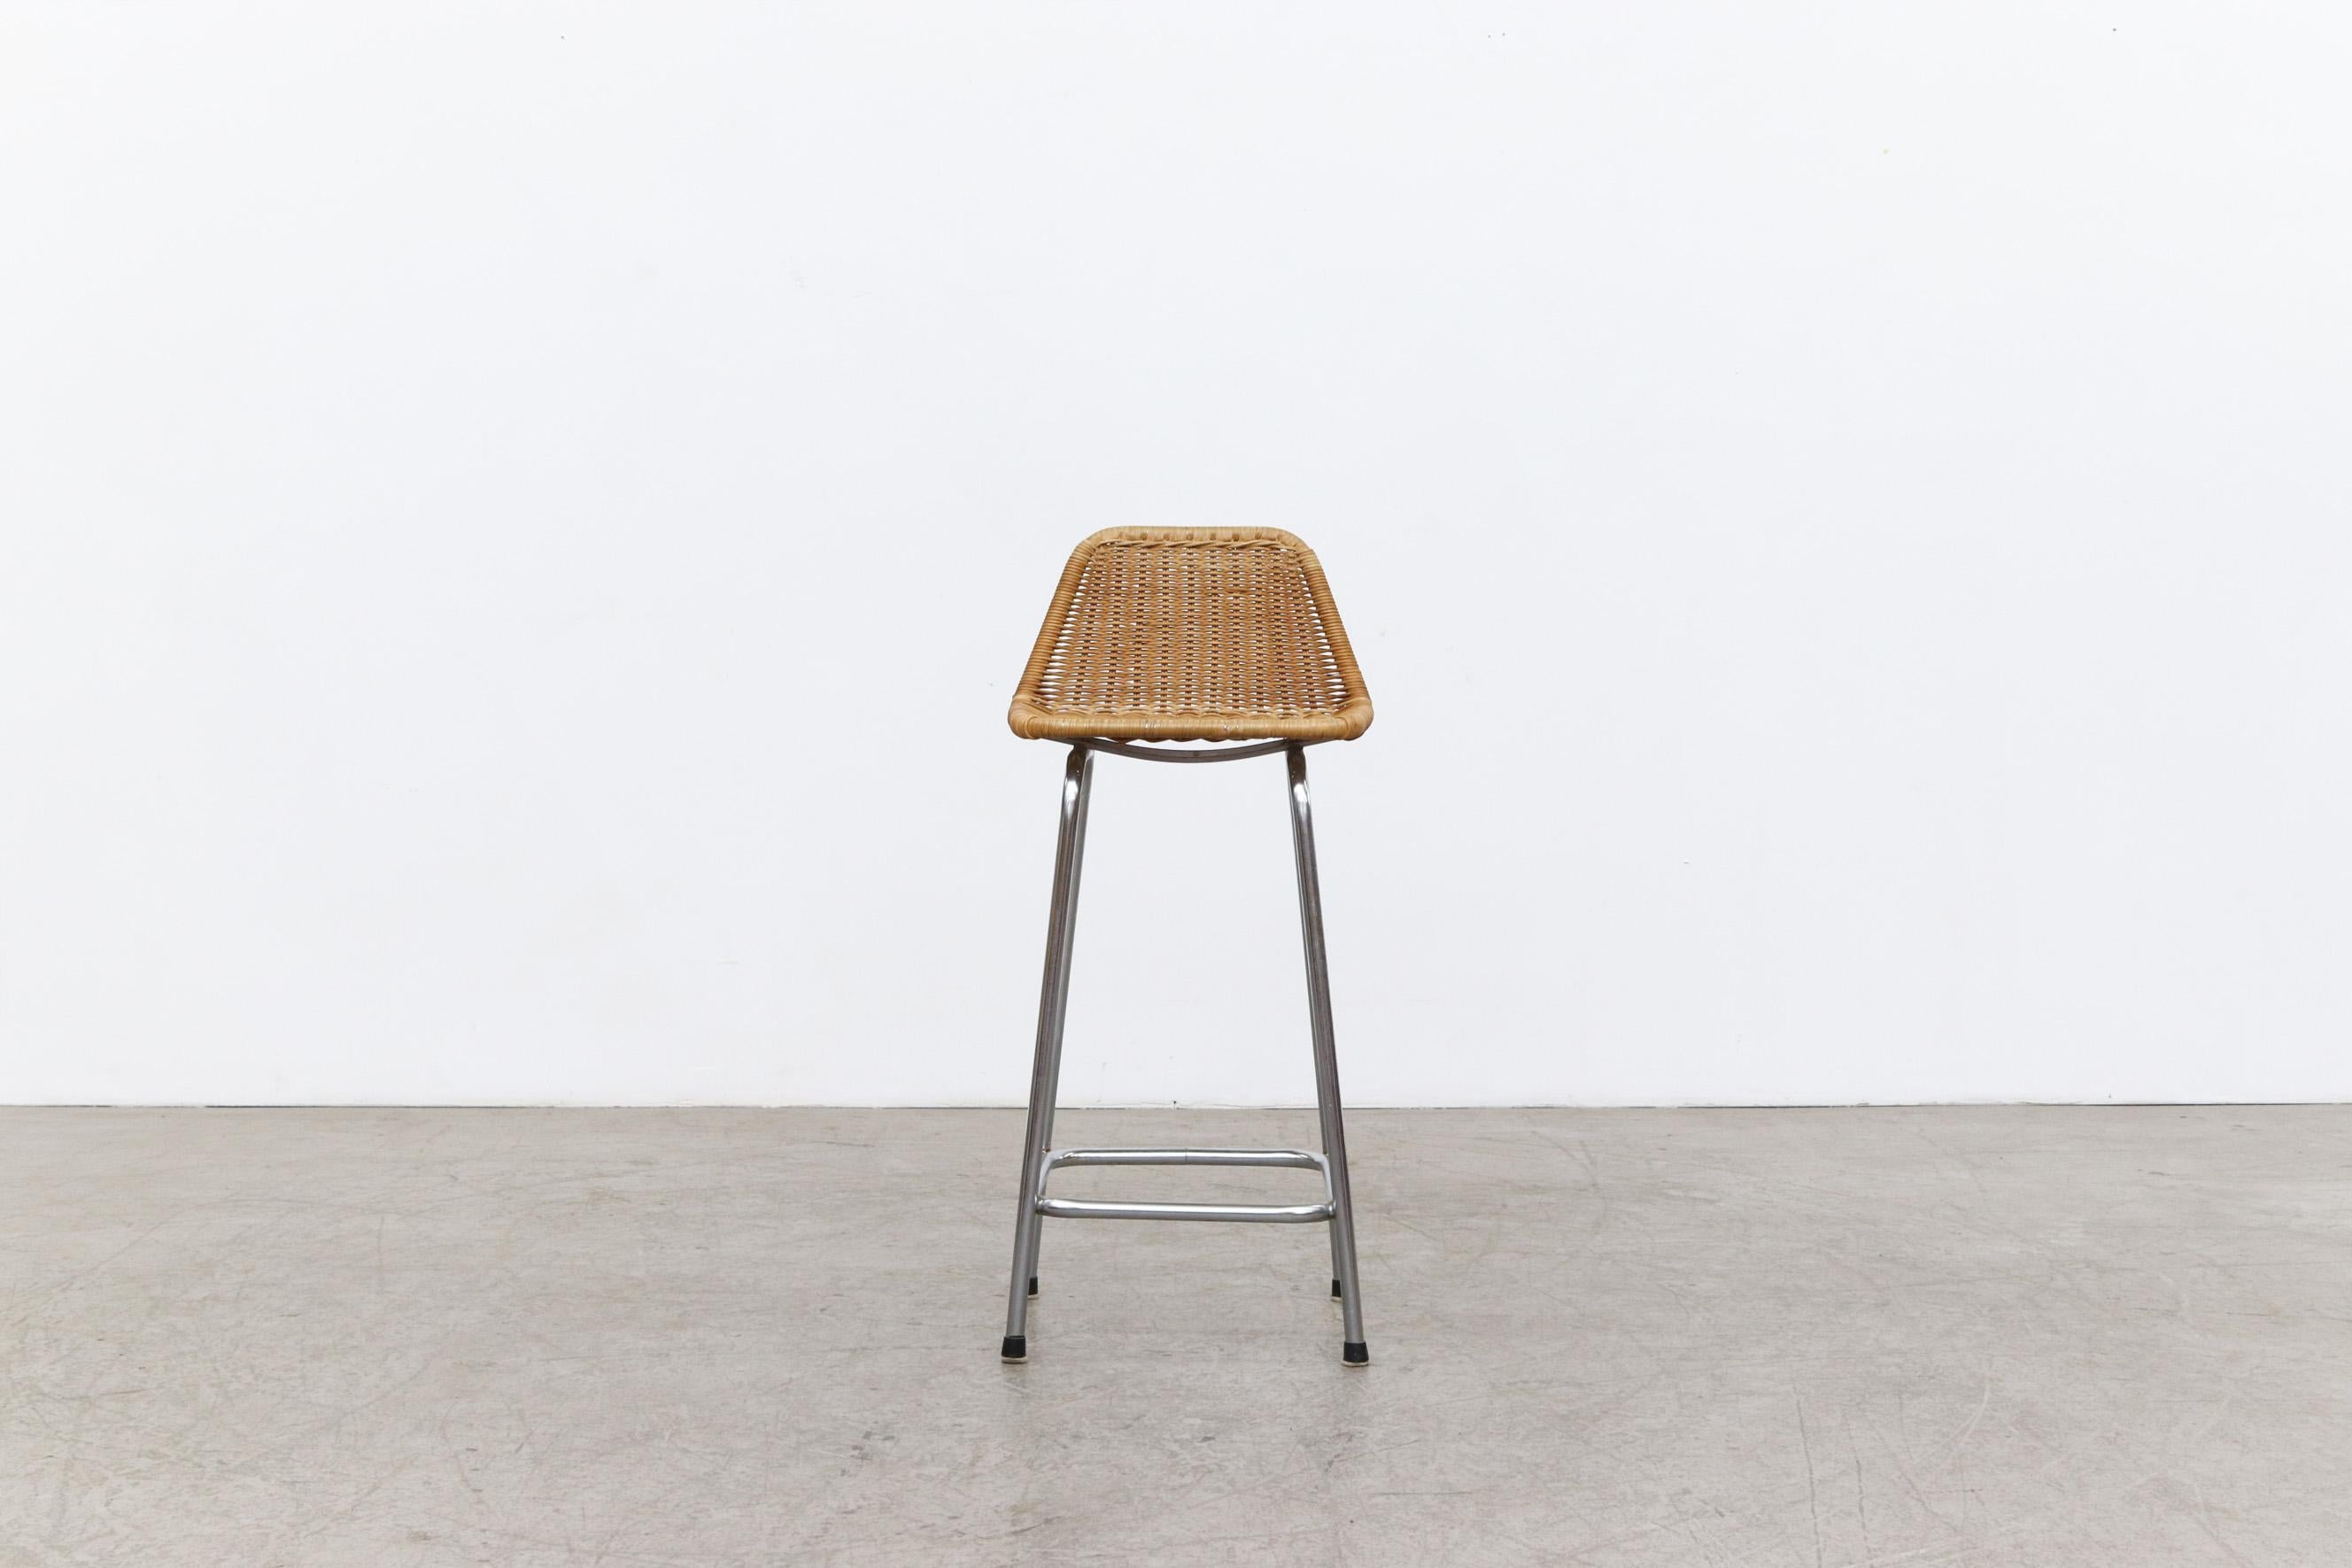 Charlotte Perriand Style Wicker Counter Stool with Chrome Legs by Dirk van Sliedregt with 25.75